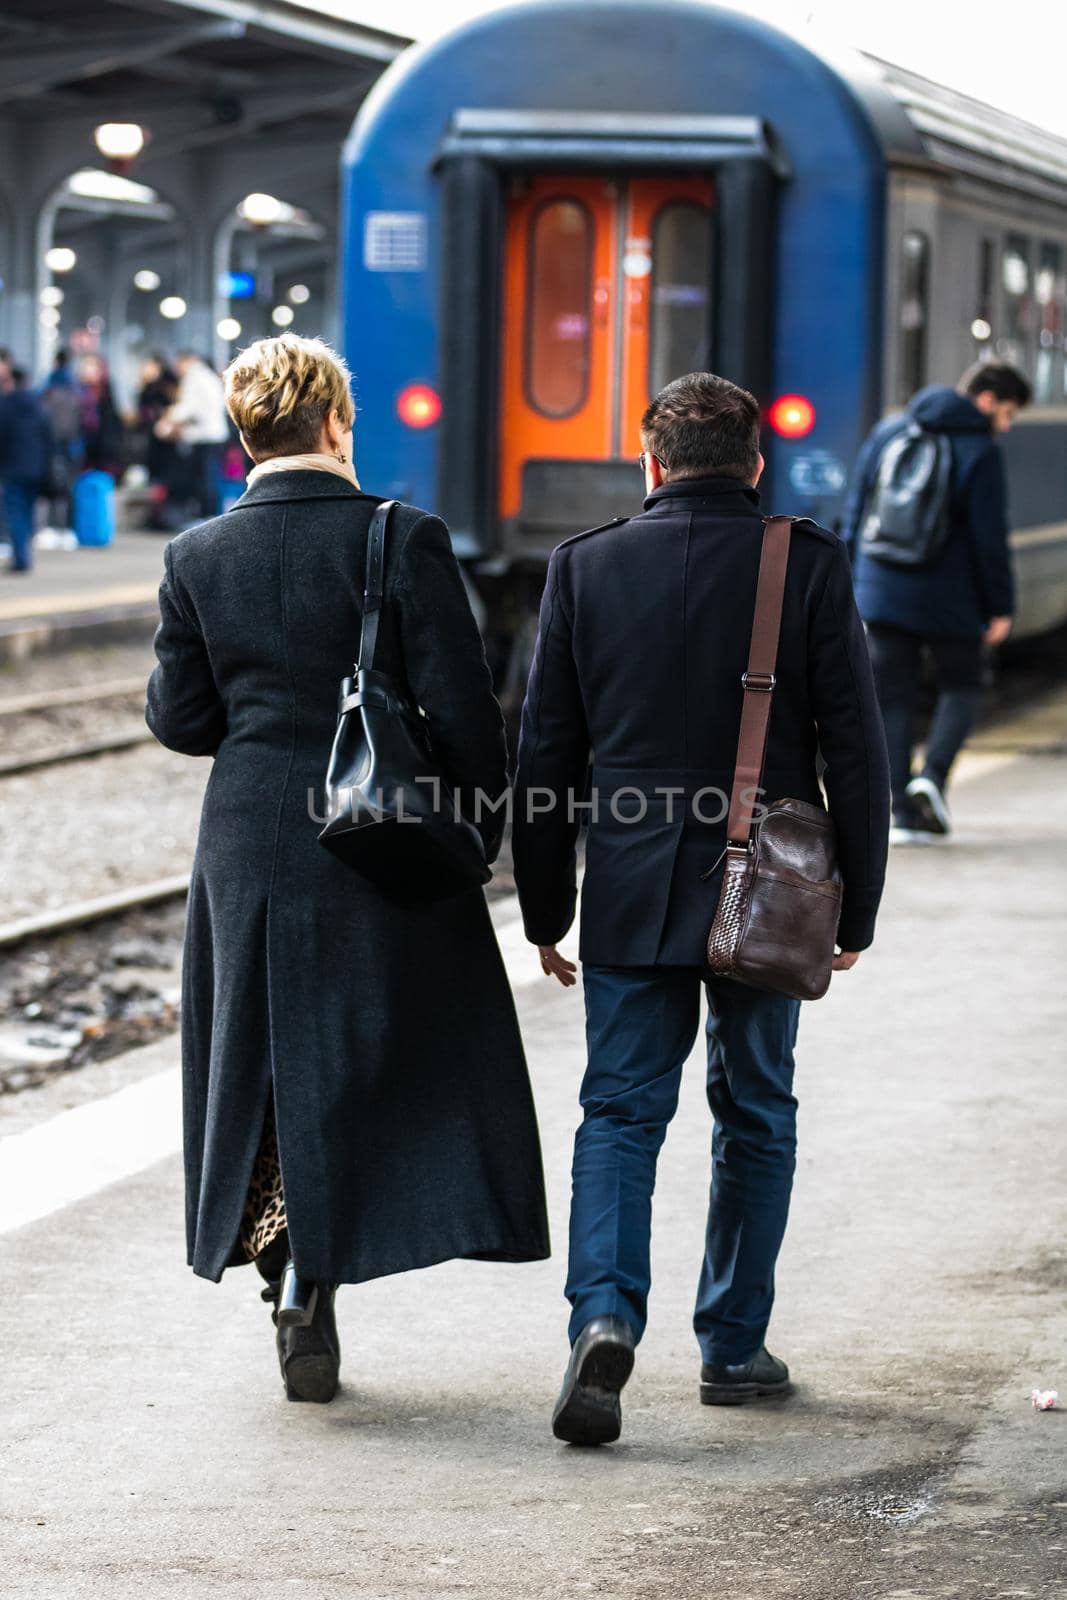 Travelers and commuters waiting for a train on the train platform of Bucharest North Railway Station (Gara de Nord Bucharest) in Bucharest, Romania, 2022